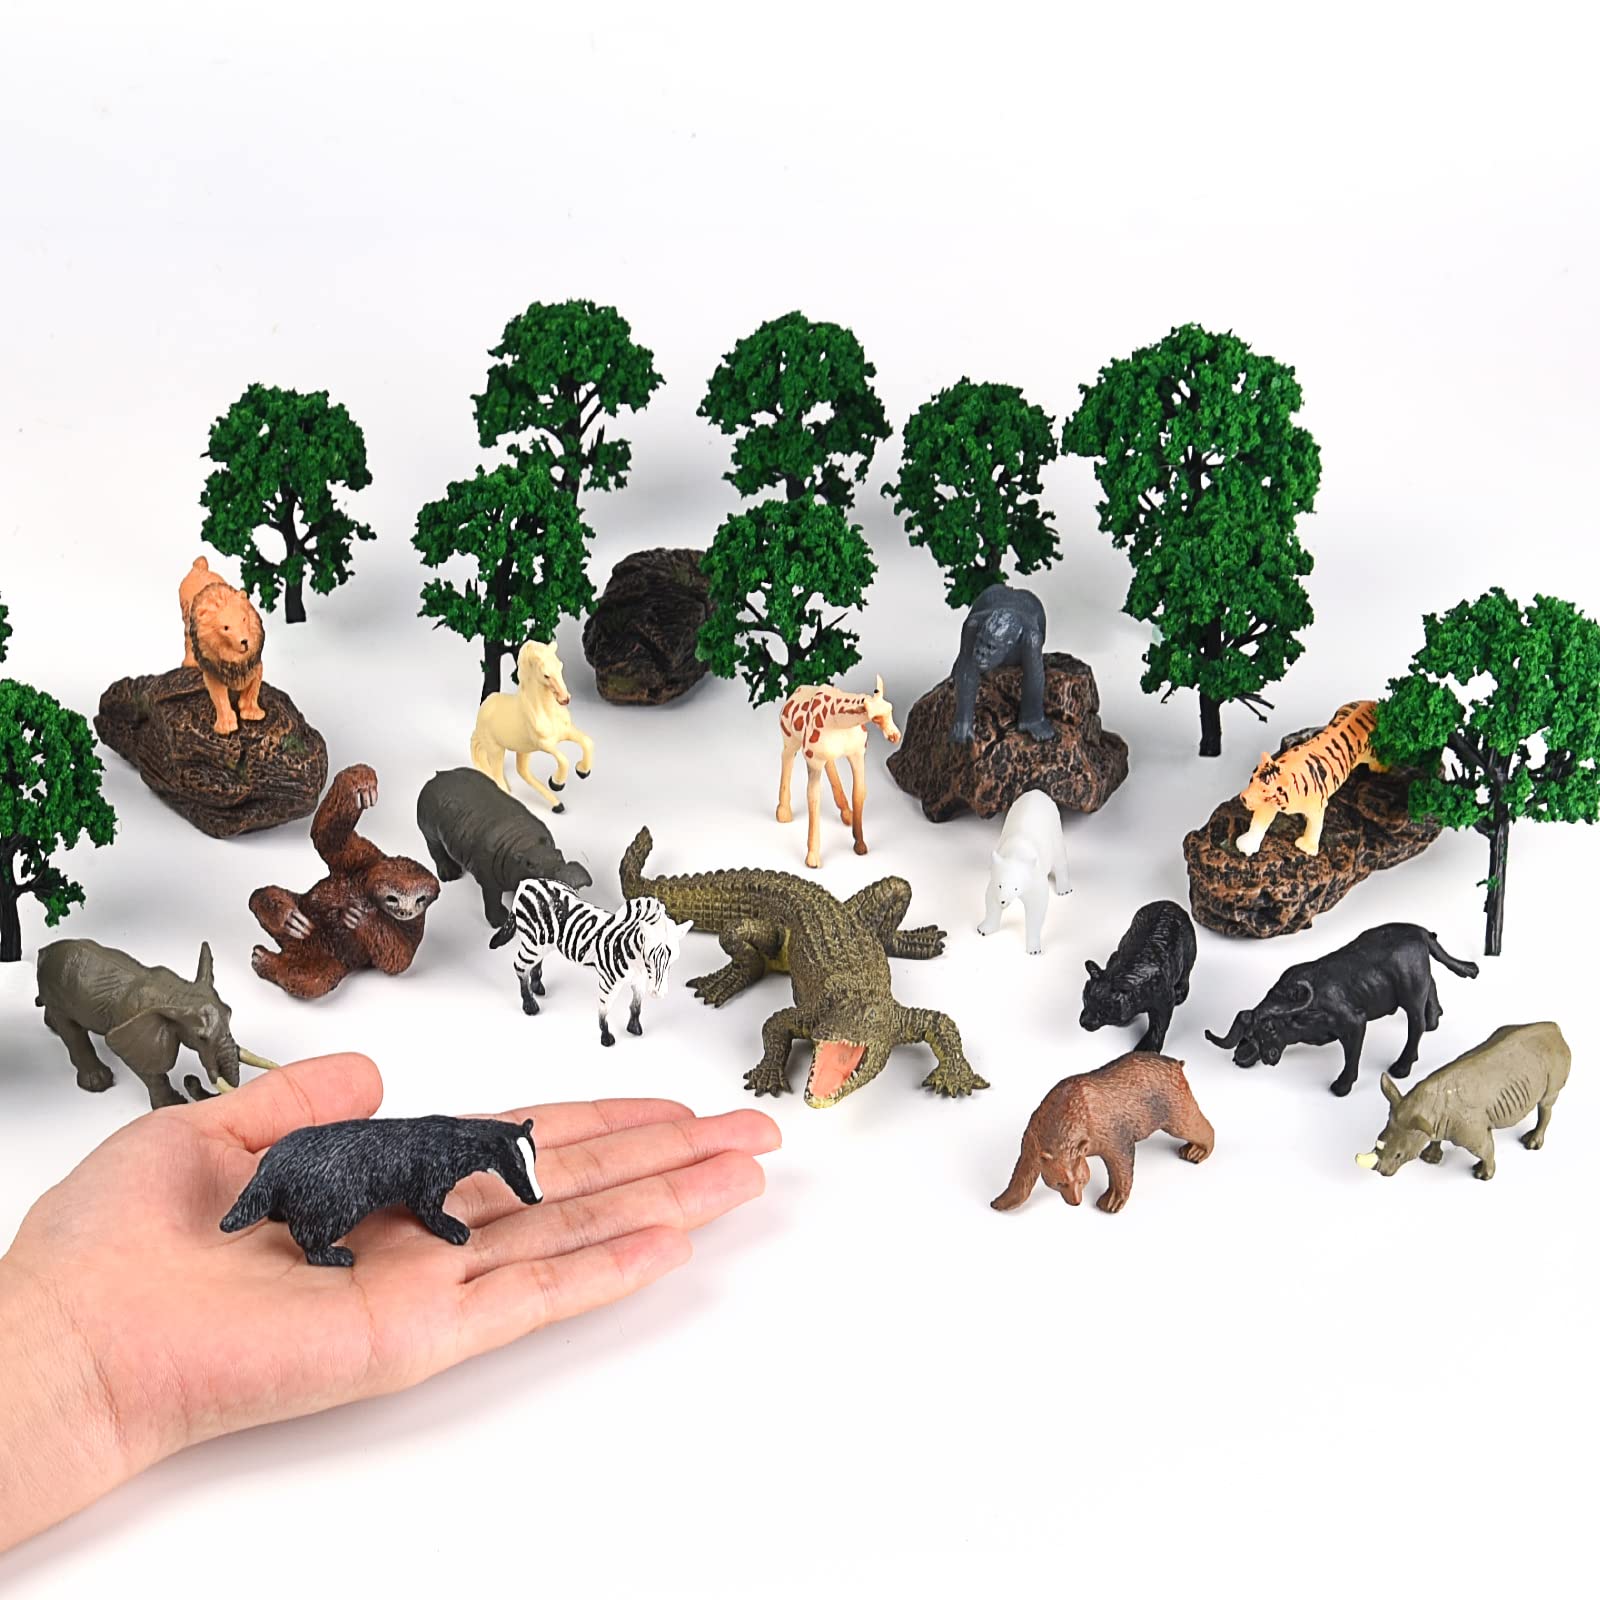 Mua ELECLAND 16Pcs Jungle Zoo Animals Figurines, Safari Animal Figures  Toys, Woodland Animal Figures, Mini Animal Cake Toppers Kids' Play Figures  for Birthday Party Decorations, Christmas Home Decorations trên Amazon Anh  chính